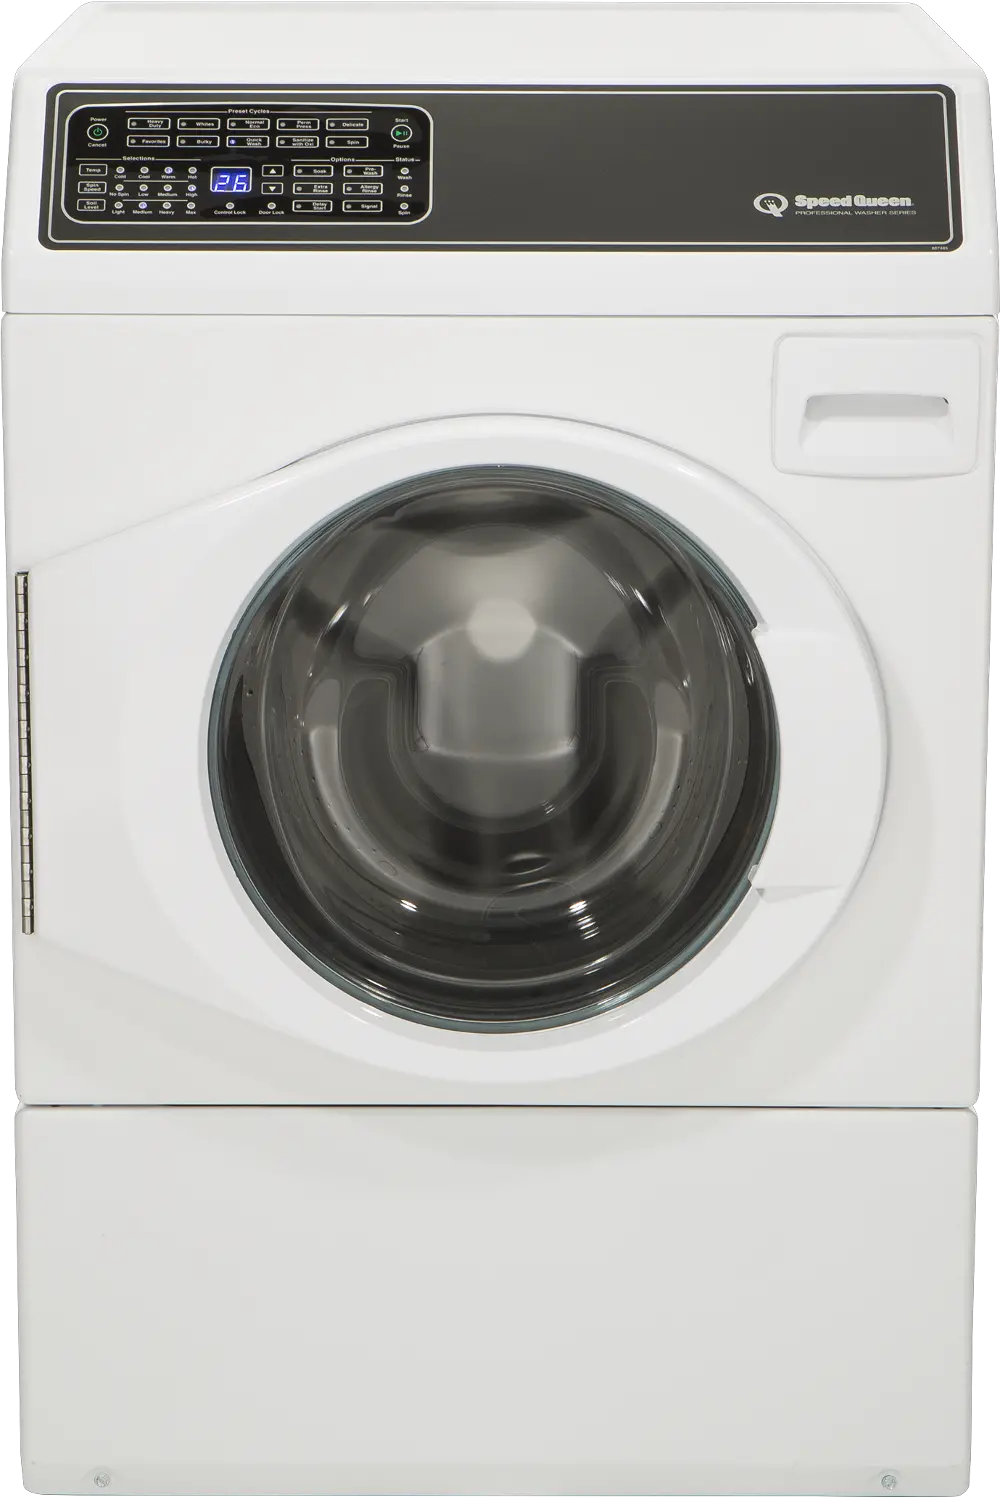 FF7005WN Speed Queen 3.5 cu ft Front Load Washer - White FF7-1